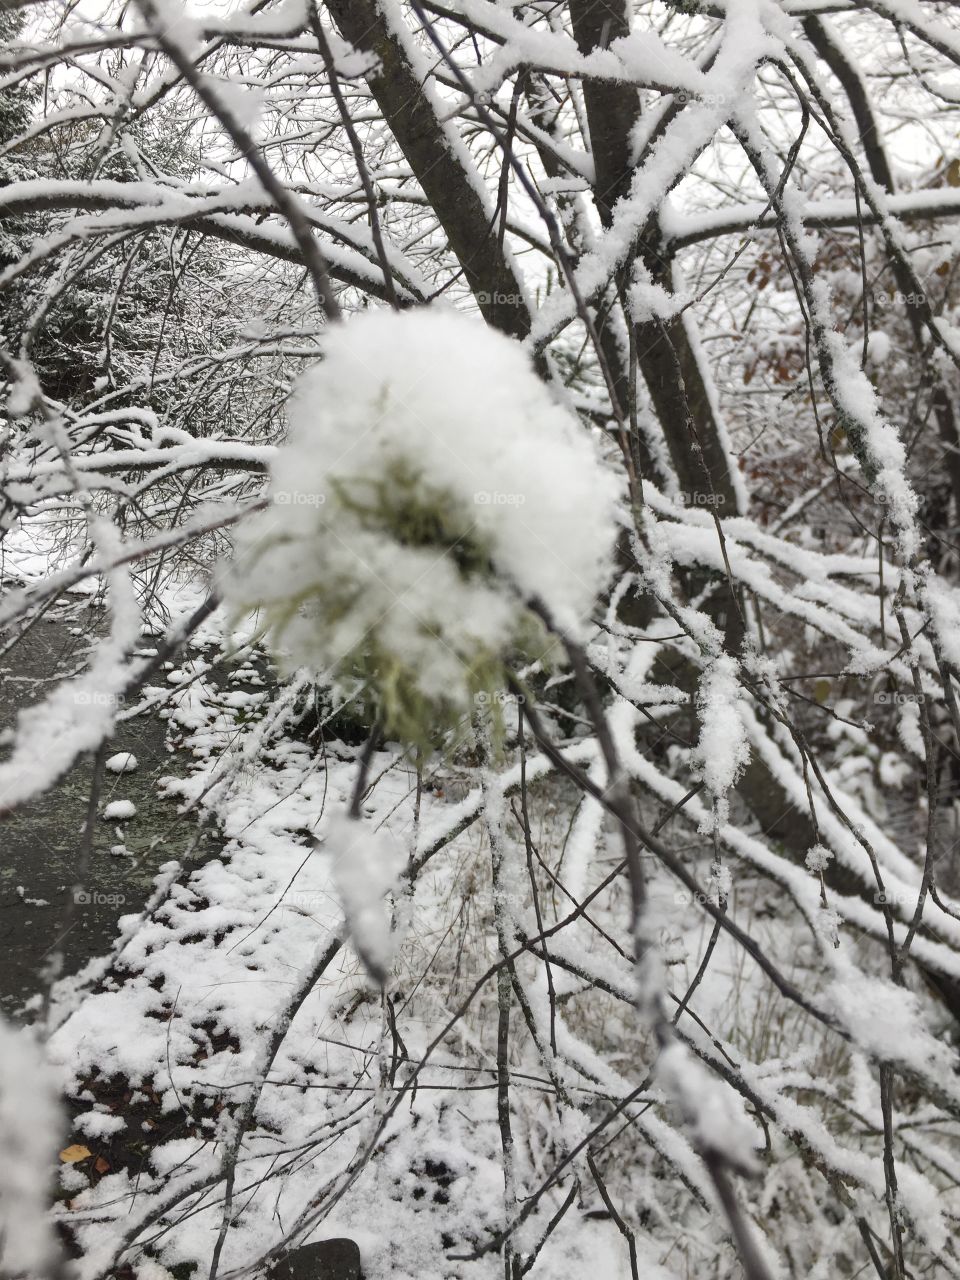 First snowfall of the season this tree has one remaining little fuzzy pod still showing it’s greens